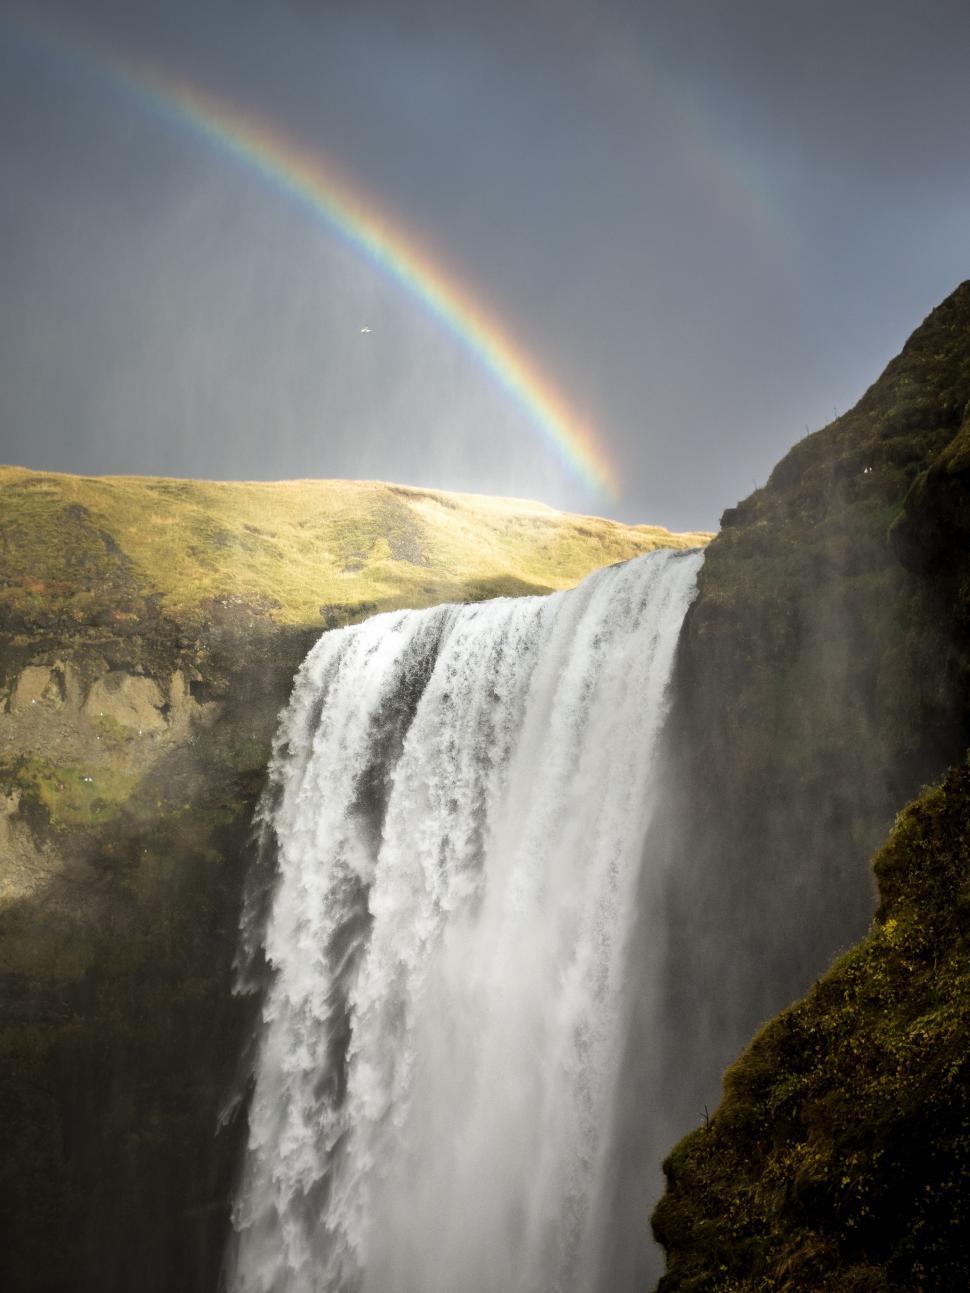 Free Image of Majestic Waterfall With Rainbow in Background 